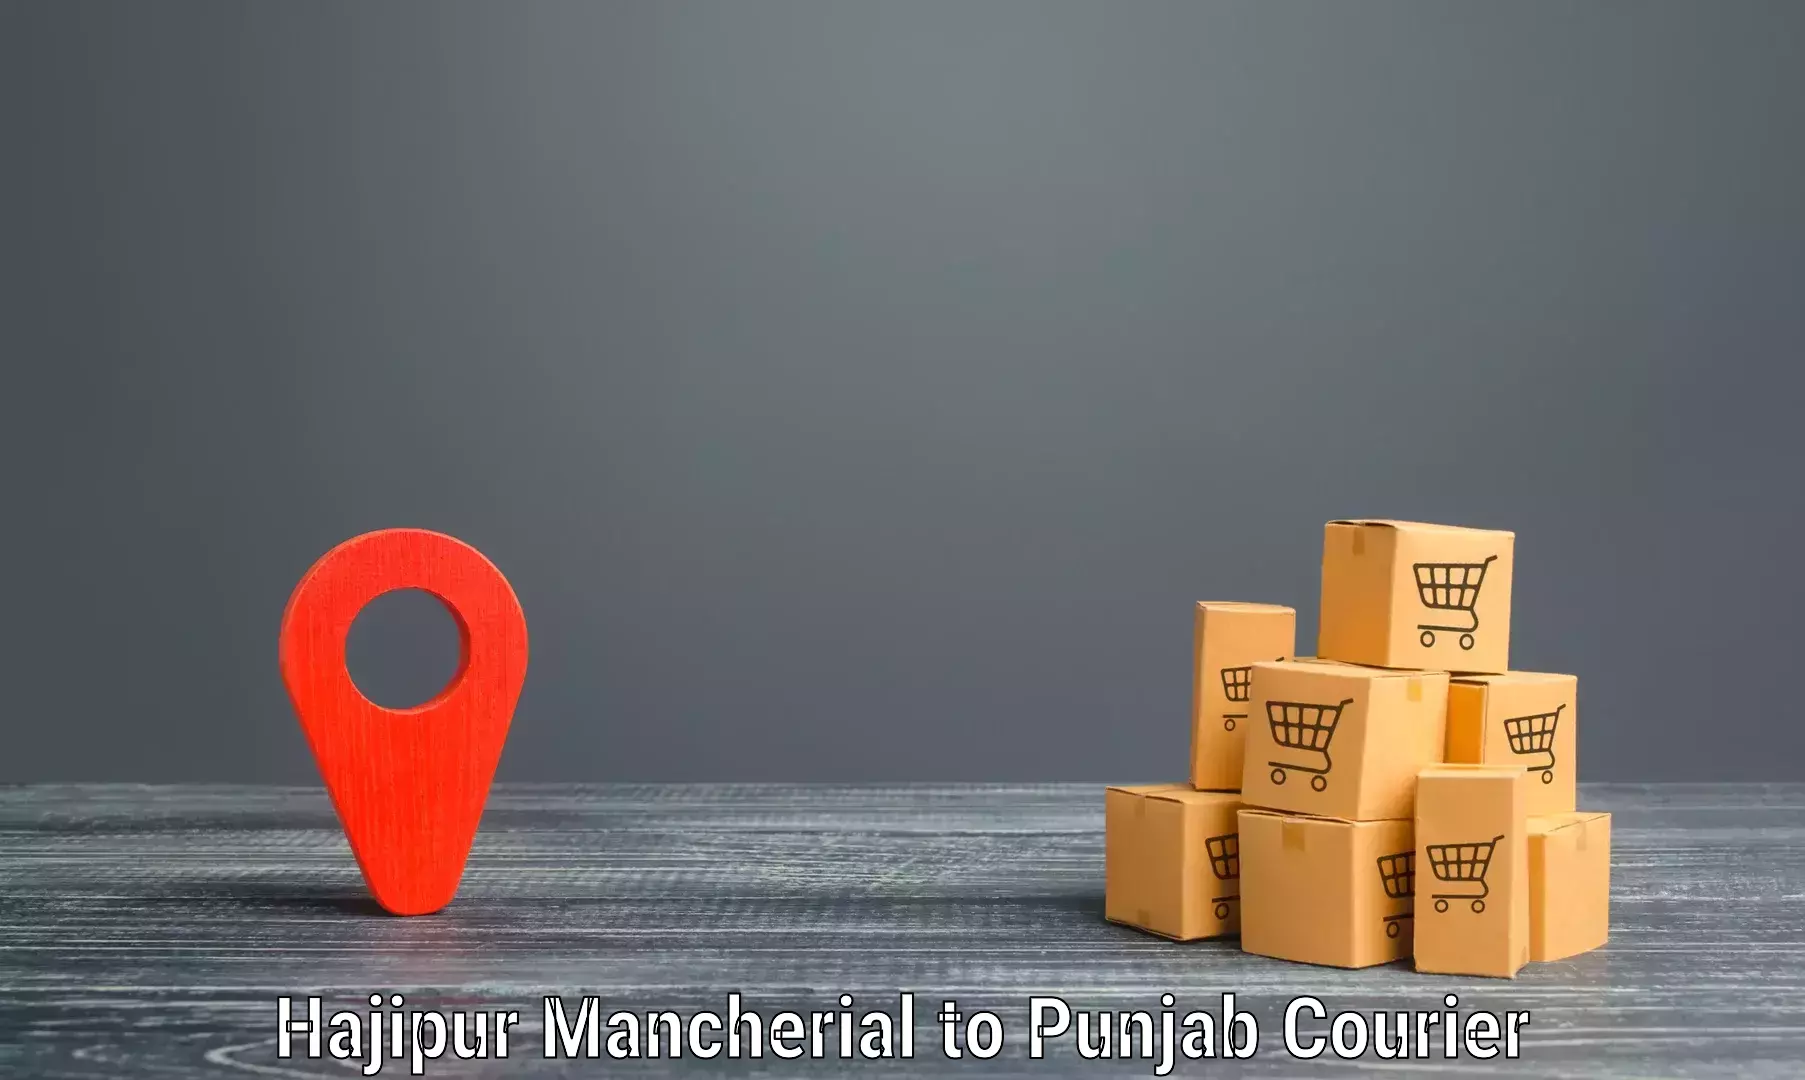 High-quality delivery services Hajipur Mancherial to Beas